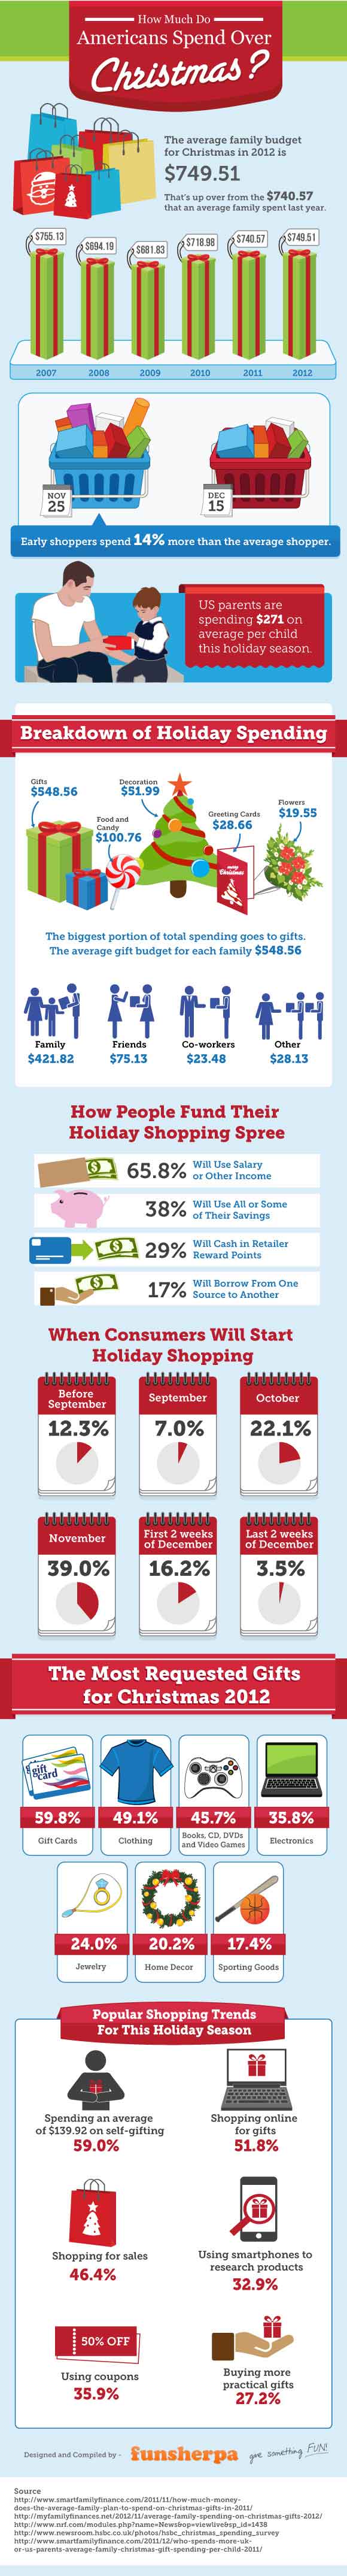 christmas spending facts info graphics